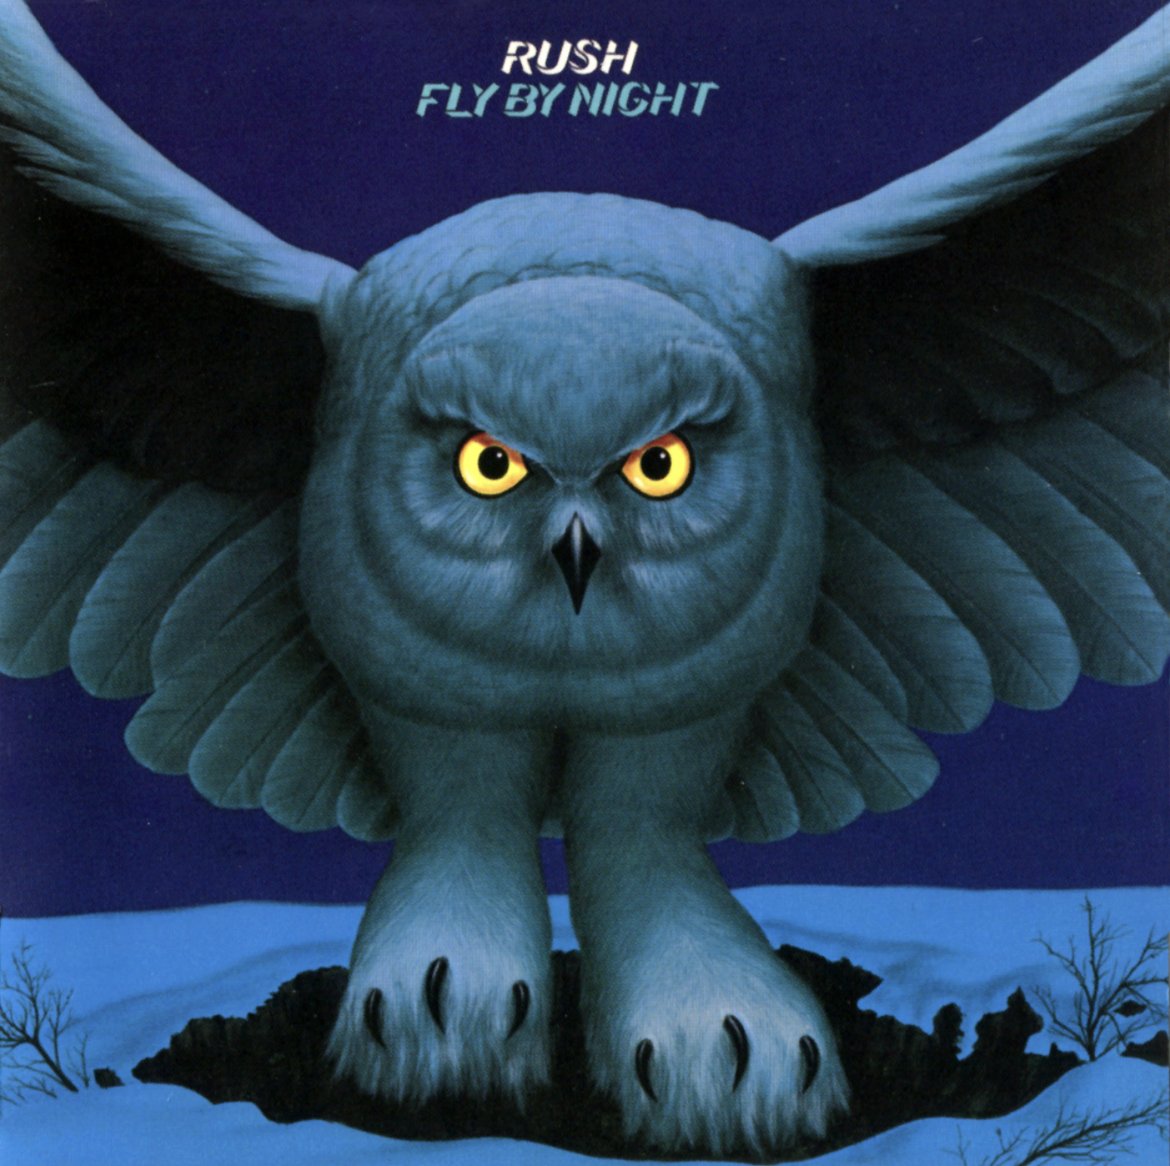 @RockLovesMe2 Rush - Fly by Night